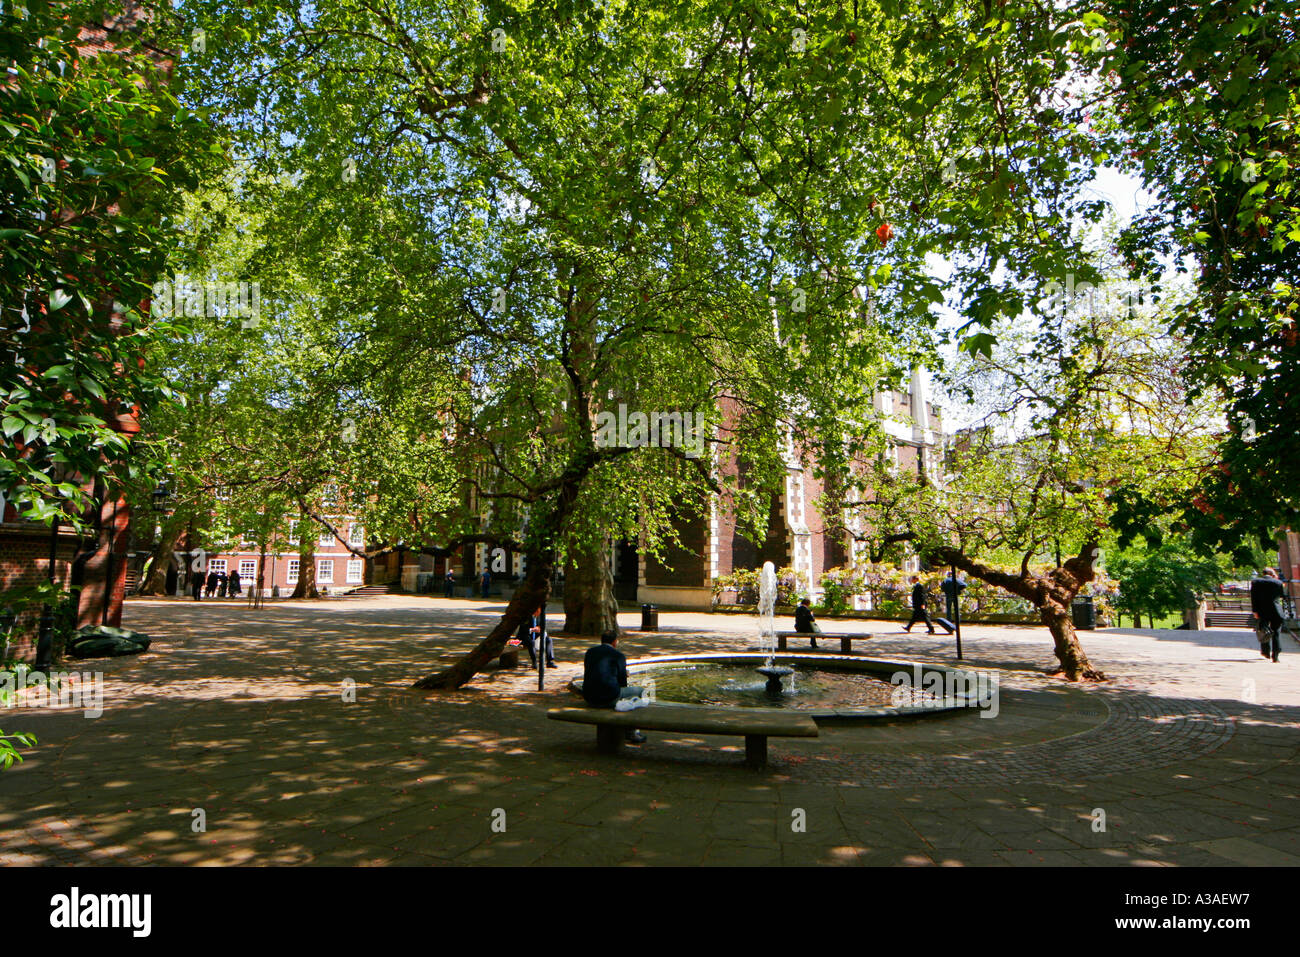 Workers find peace and quiet under the tree by the fountain in Middle Temple London Stock Photo